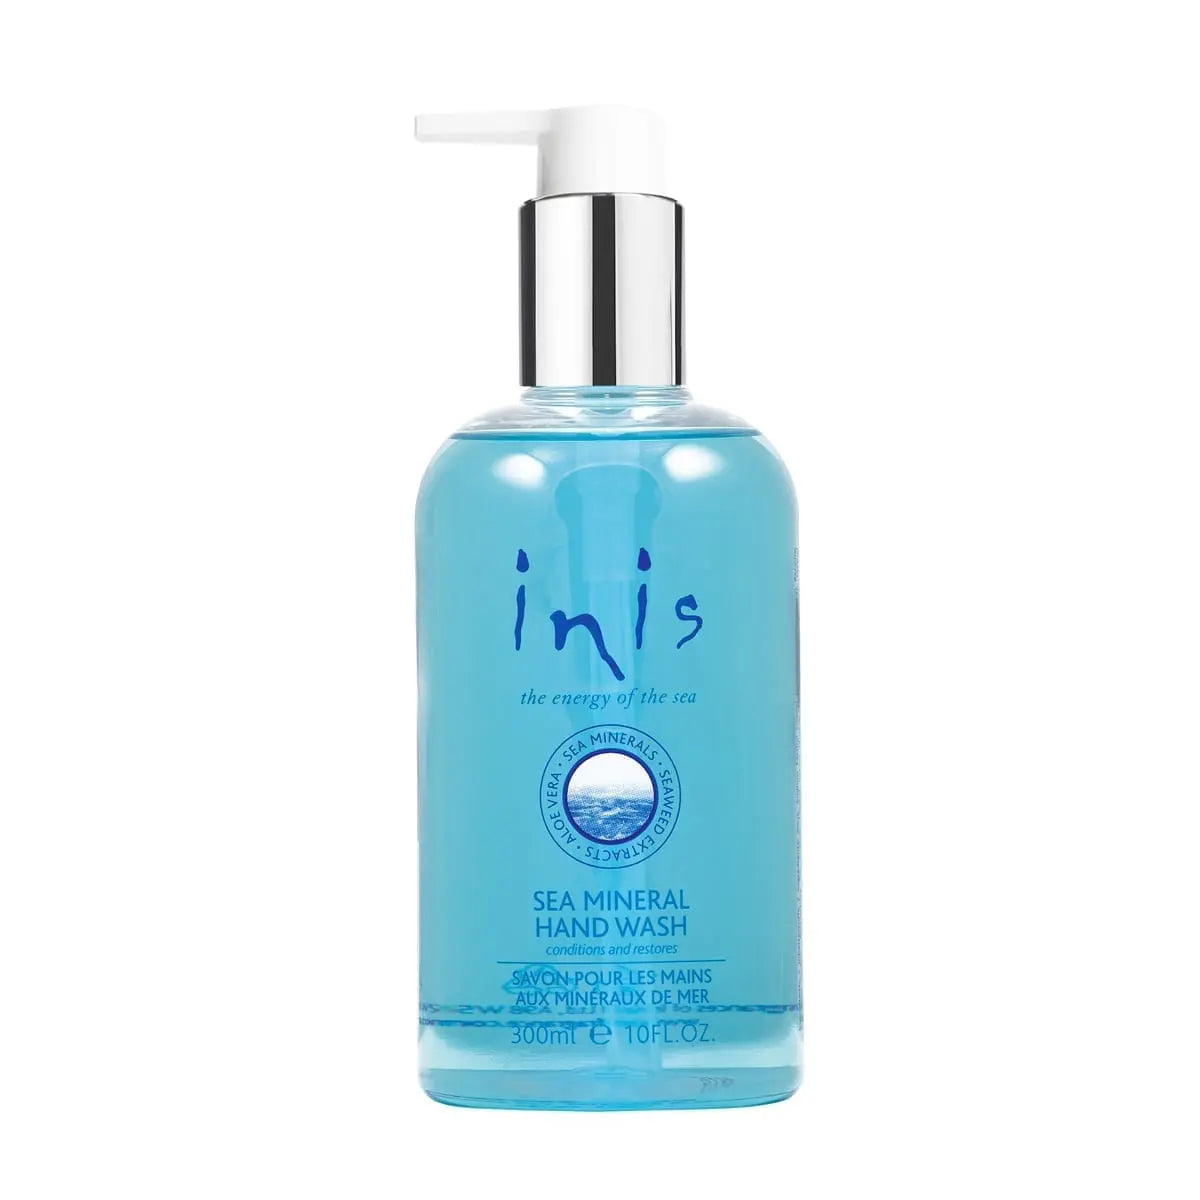 Inis Hand Wash Pump 10oz Bath & Body in Default Title at Wrapsody